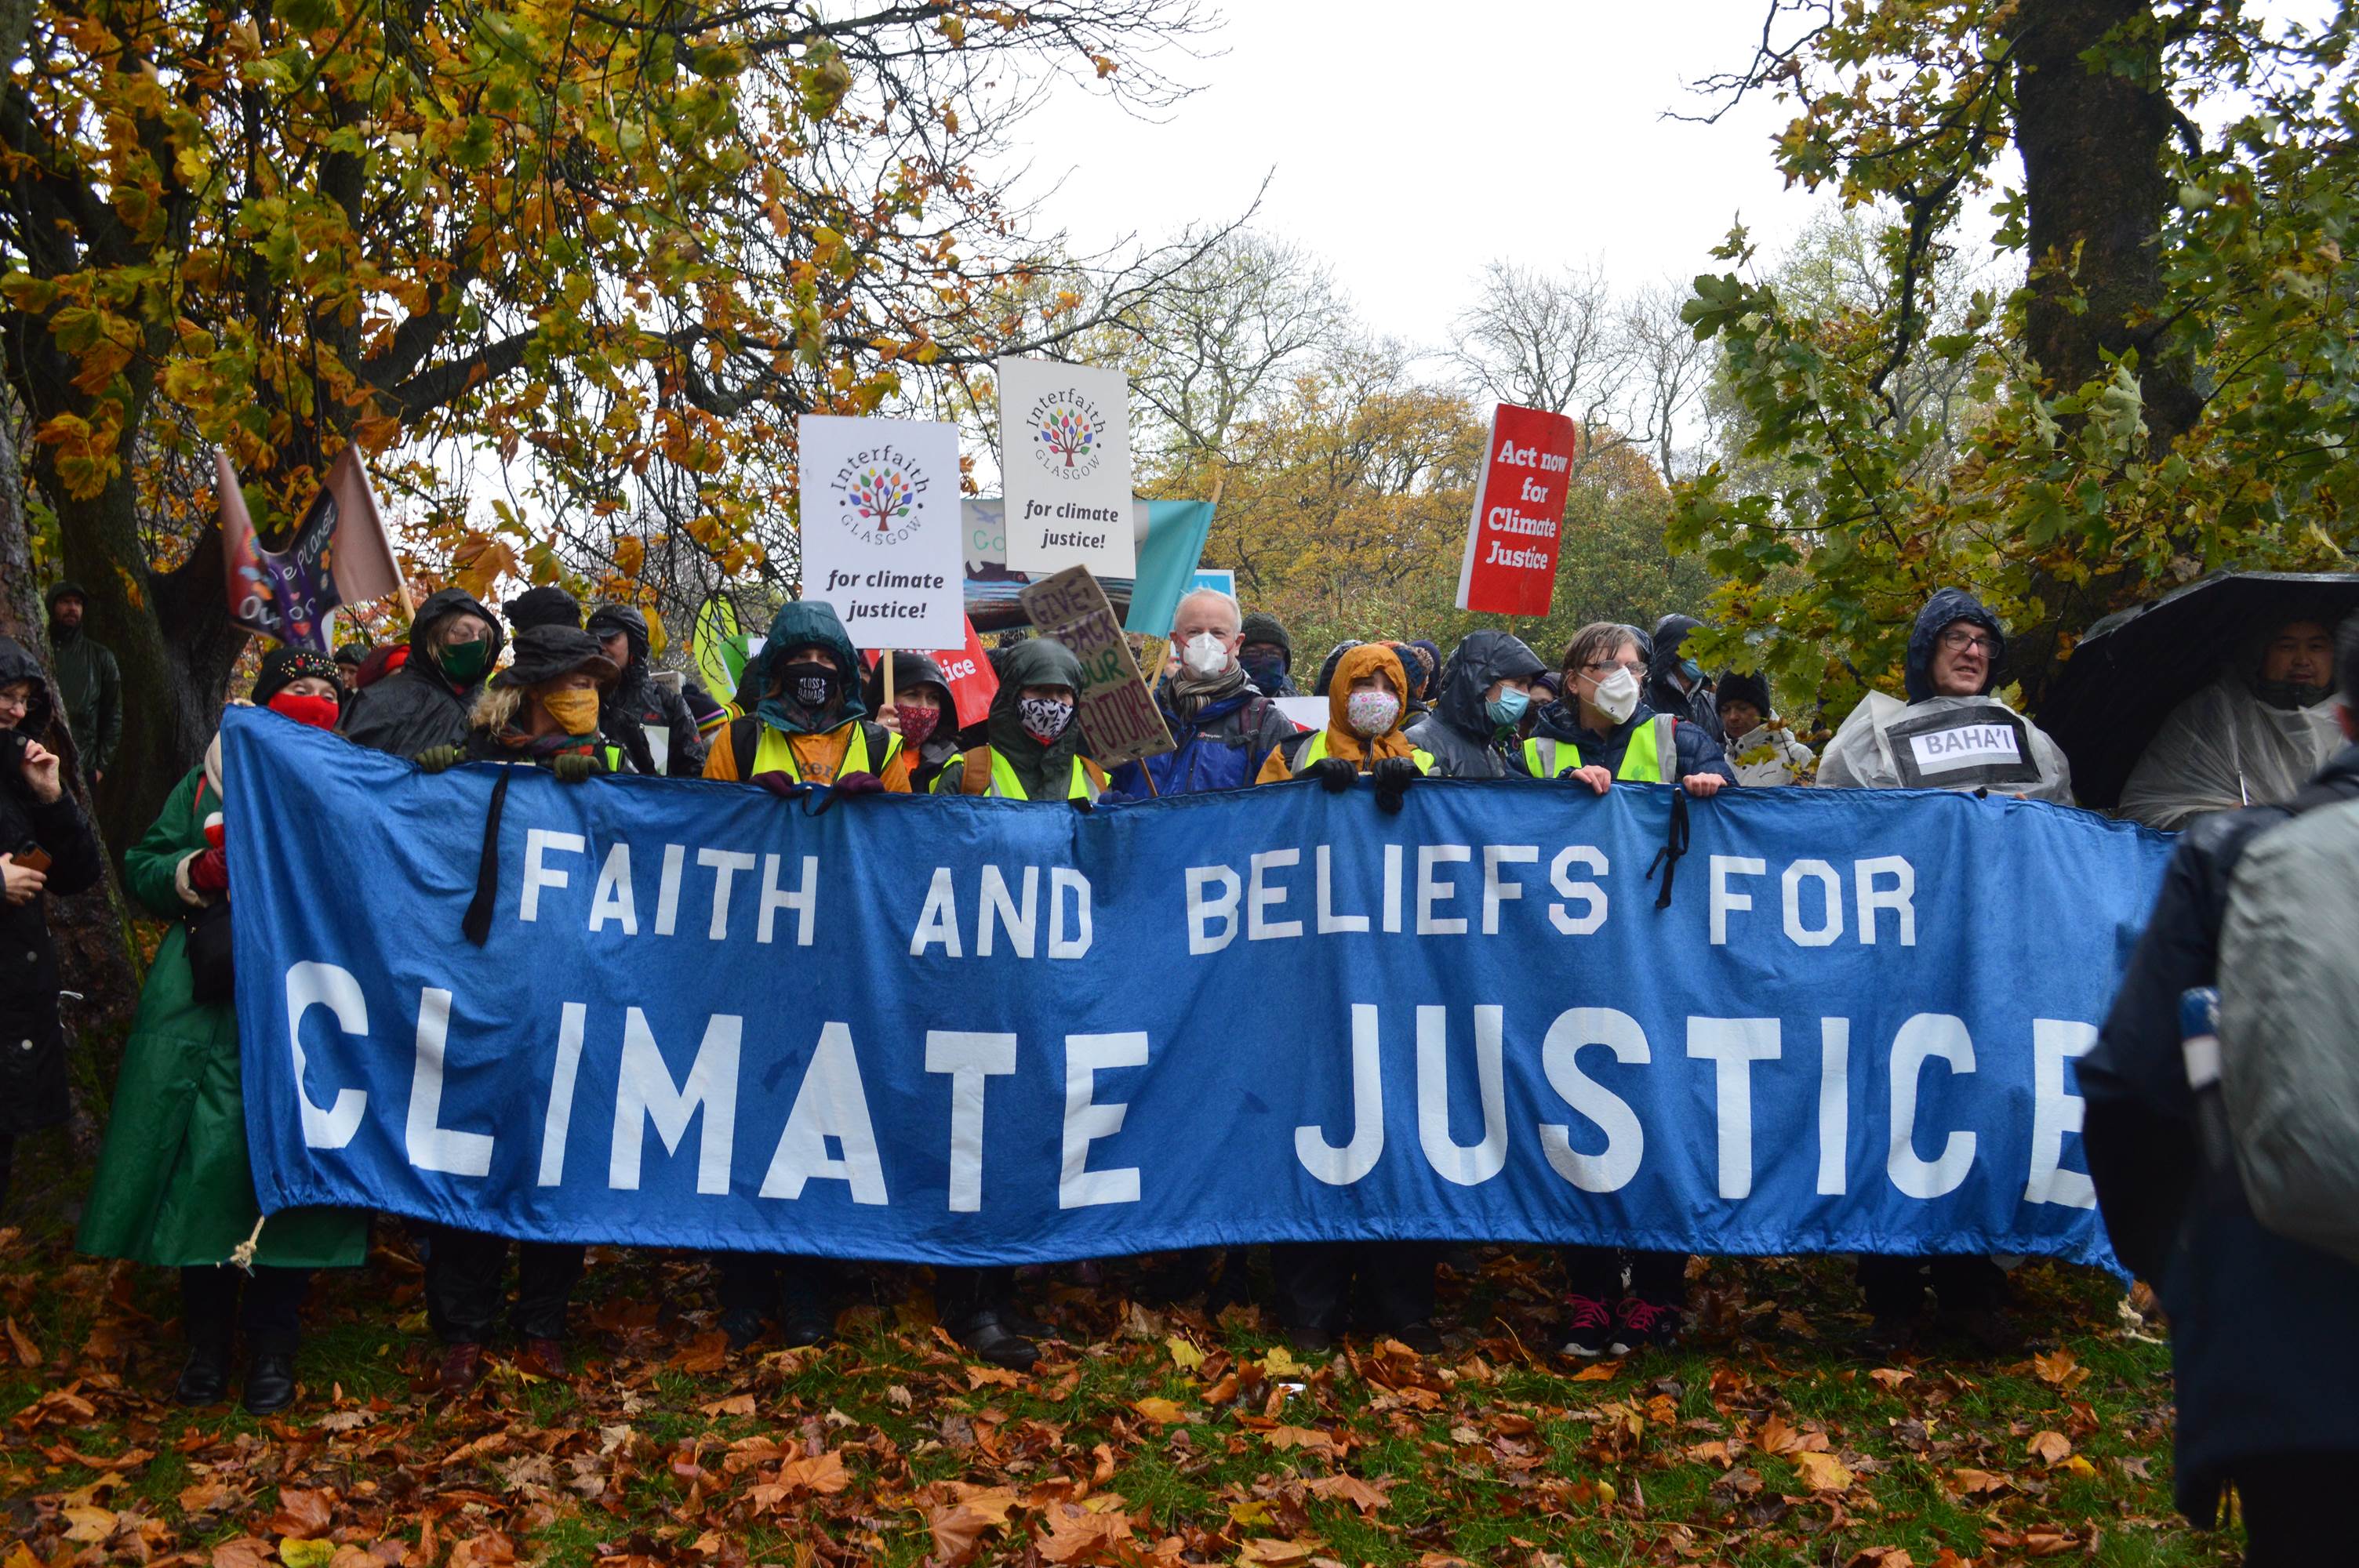 People attending an inter-faith climate justice rally at COP26